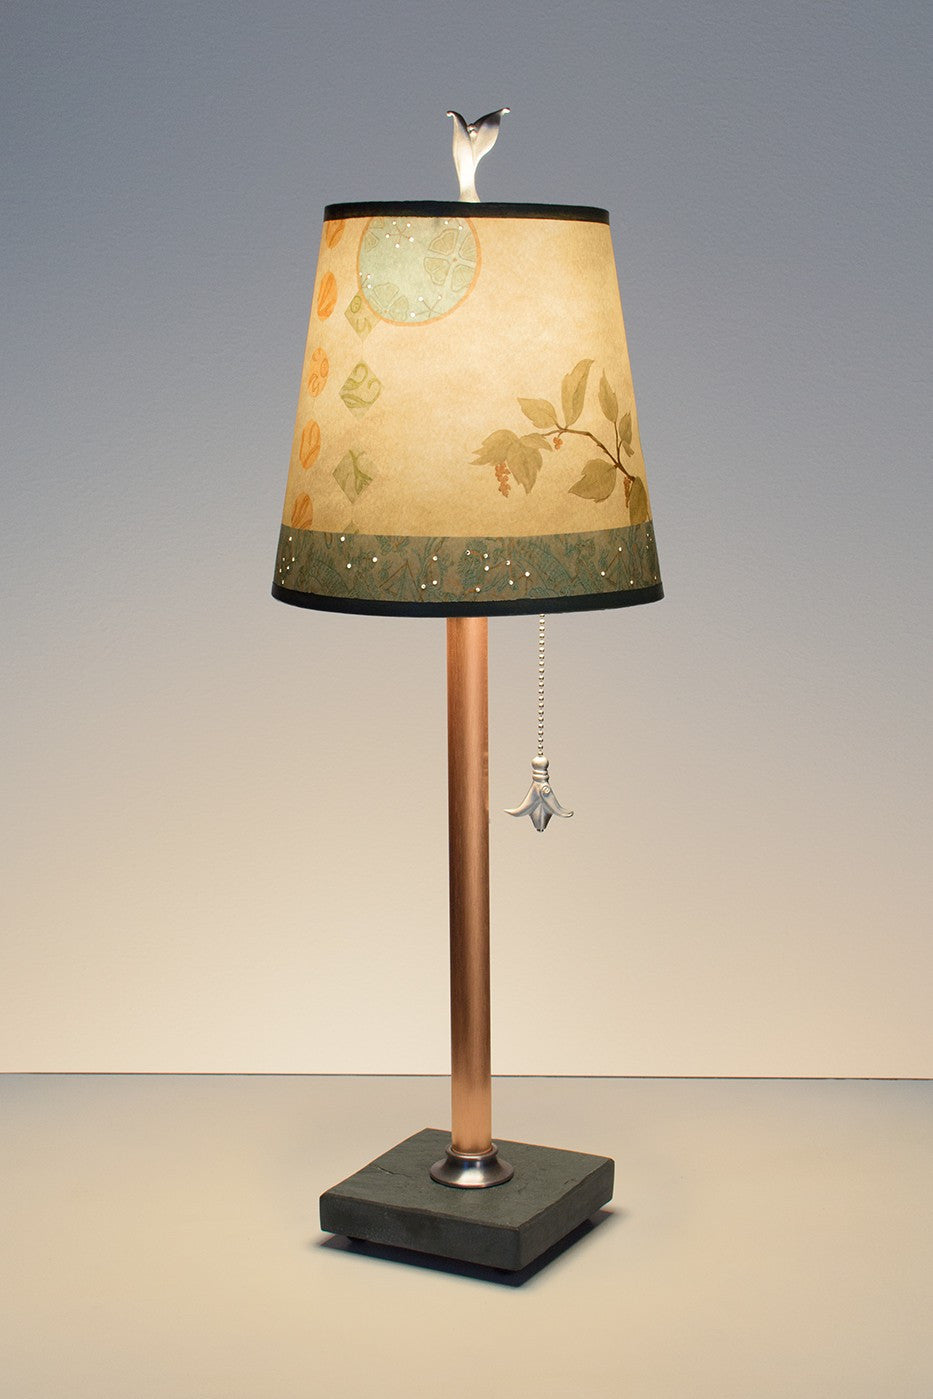 Copper Table Lamp with Small Drum Shade in Celestial Leaf - True North Gallery